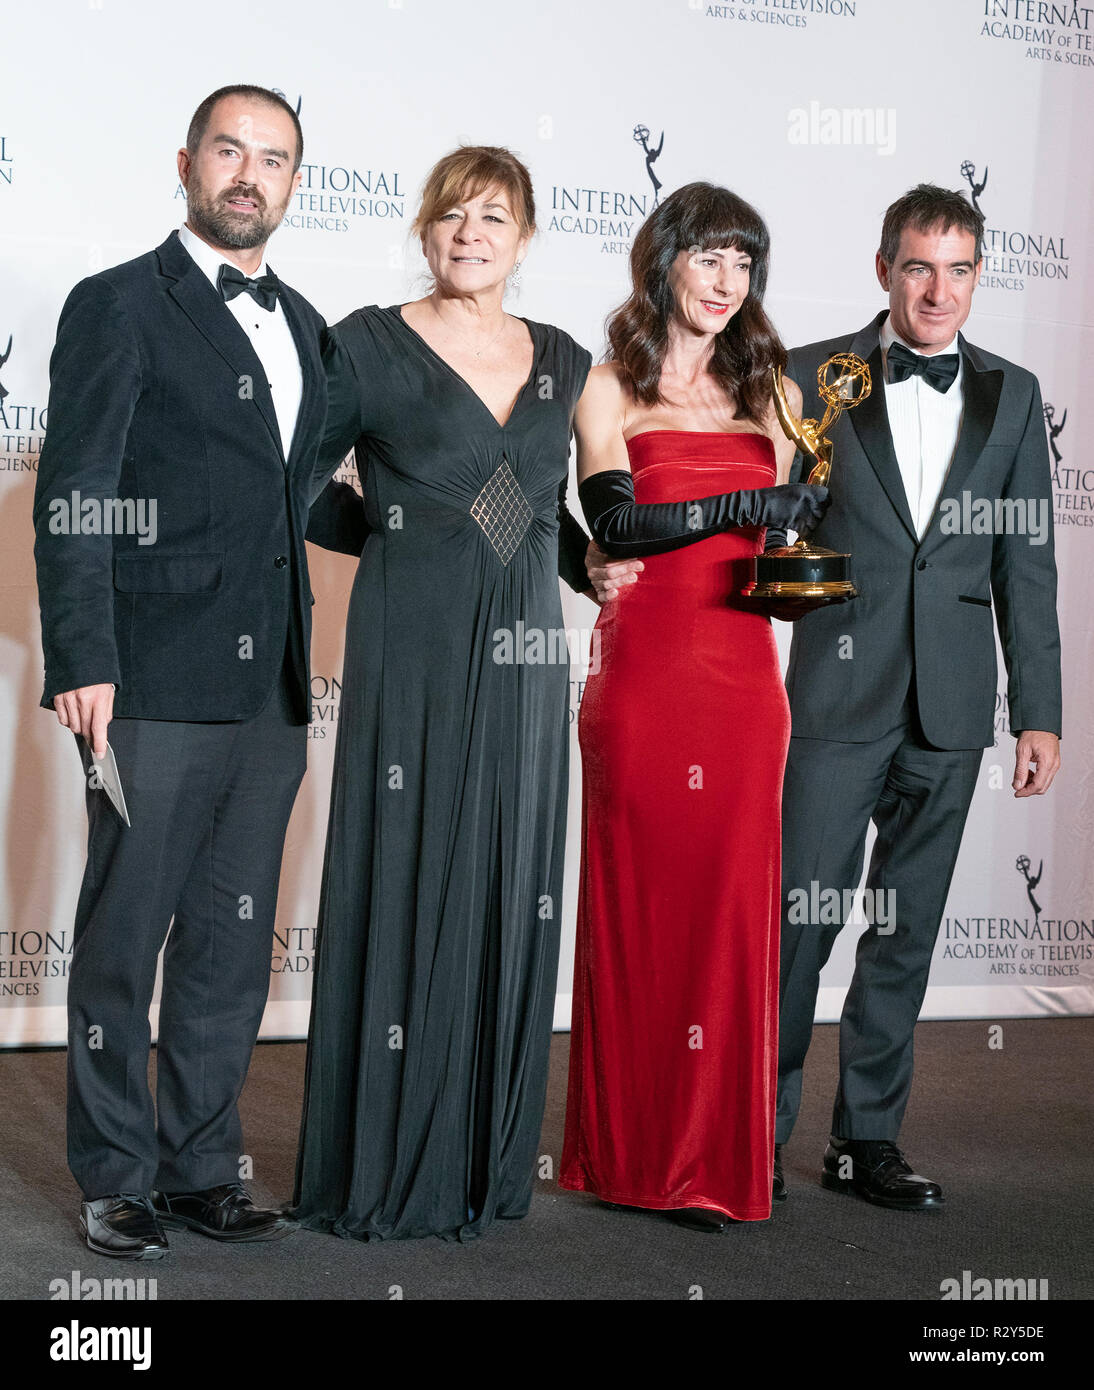 fame assembly former Alex Pina (R) and Sonia Martinez (2nd L) winner for the Drama Series during  the 46th International Emmy Awards at Hilton hotel (Photo by Lev  Radin/Pacific Press Stock Photo - Alamy